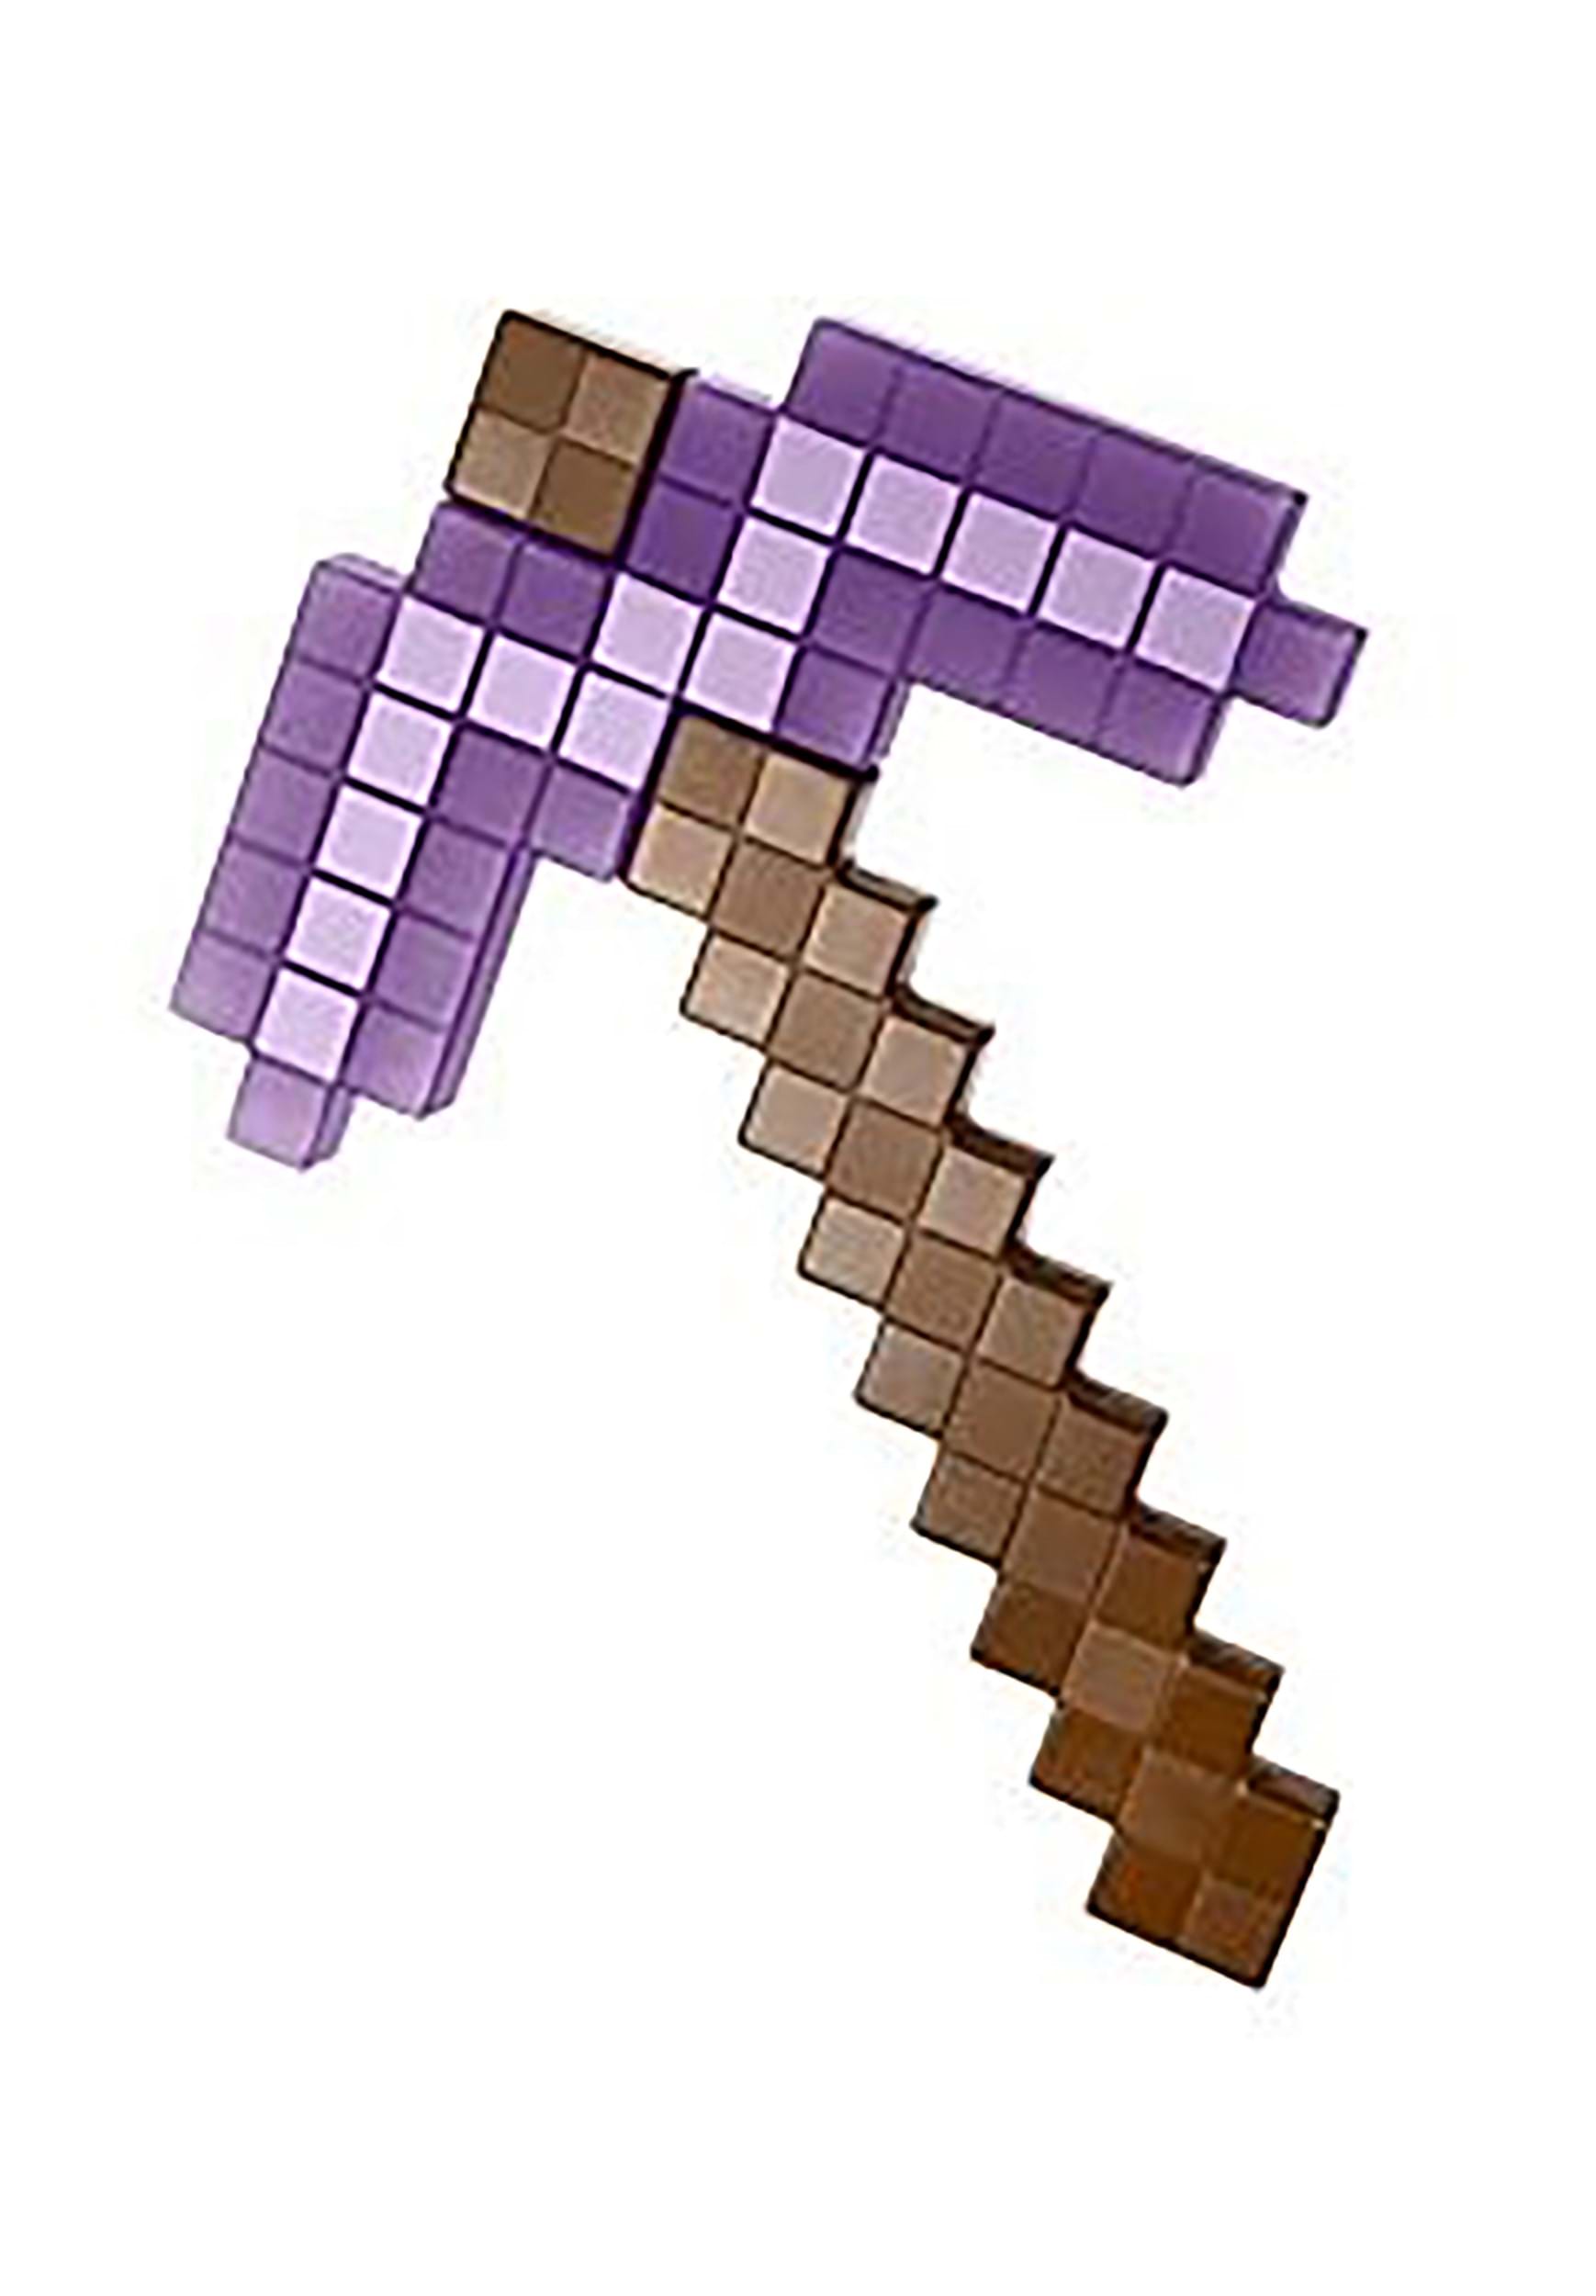 Enchanted Pickaxe from Minecraft